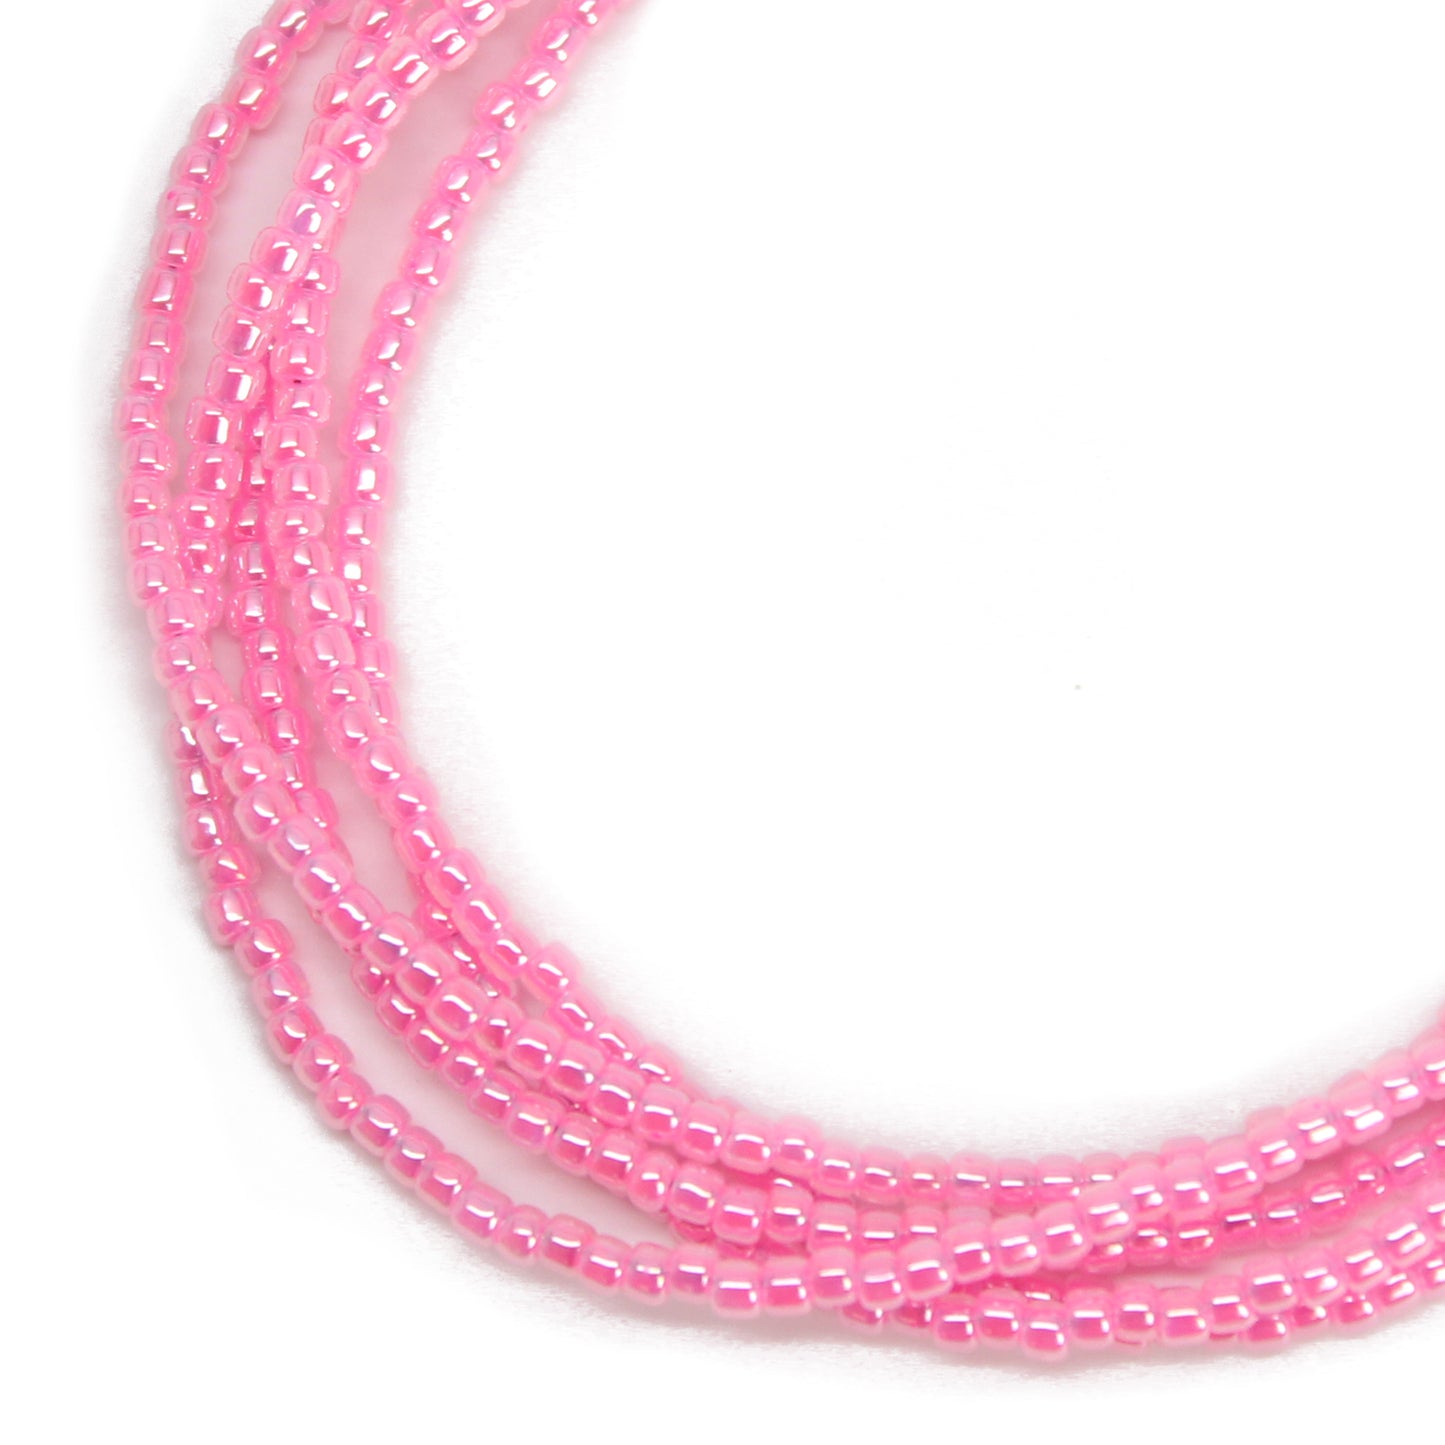 Pink Opaque crystal beads necklace set with a white cz stone balls pen –  Soyara Ethnics Studio